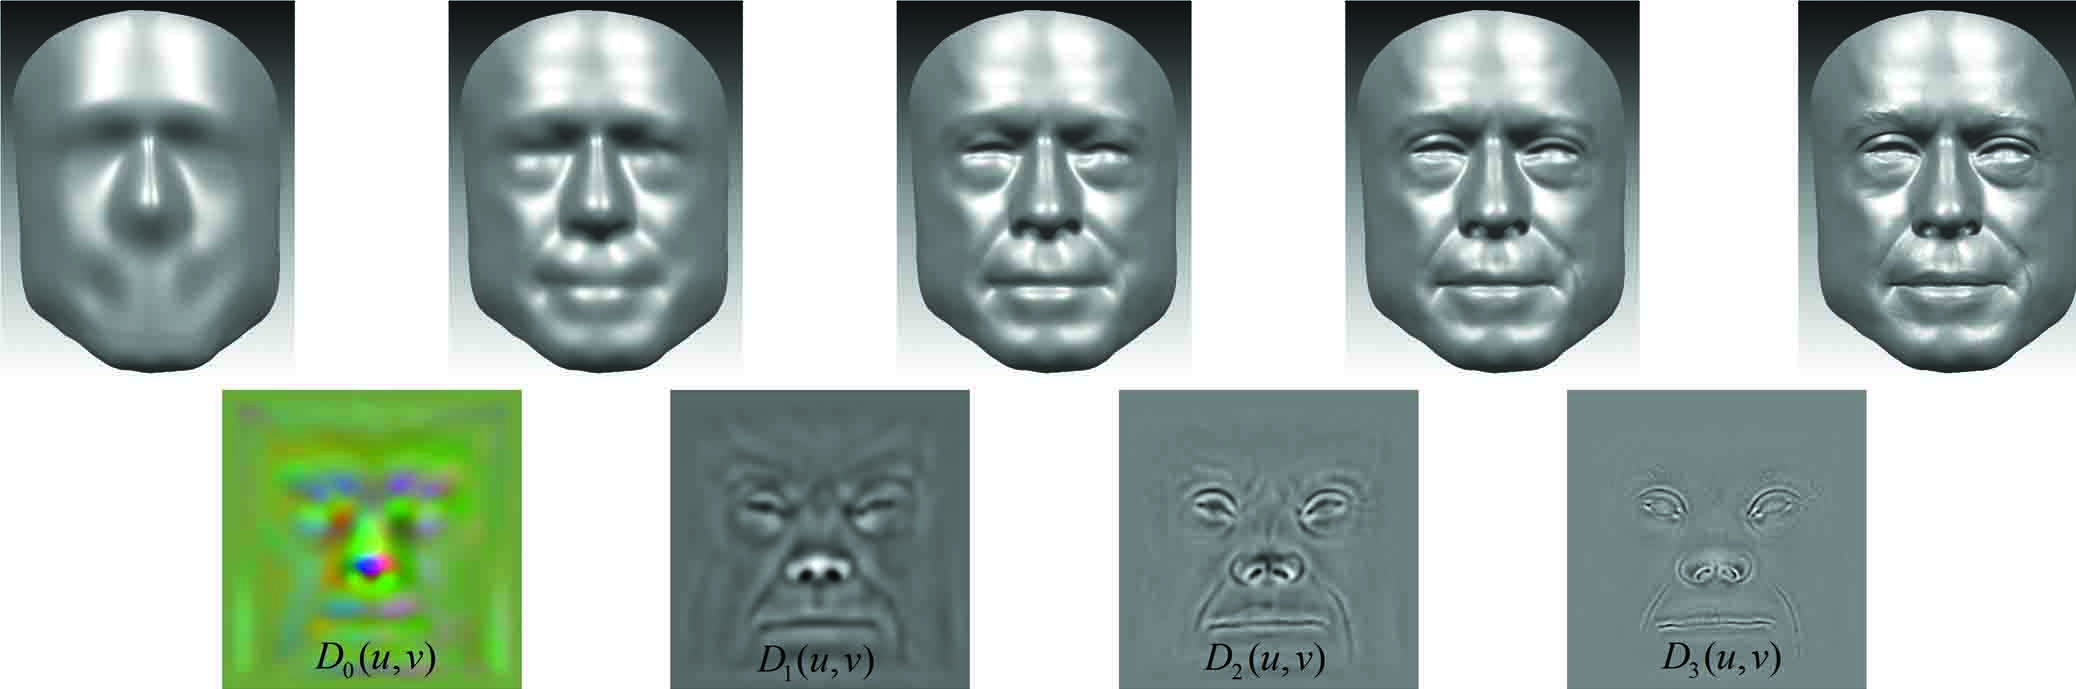 A multiscale face model consisting of a base surface and multiscale continuous displacement maps.